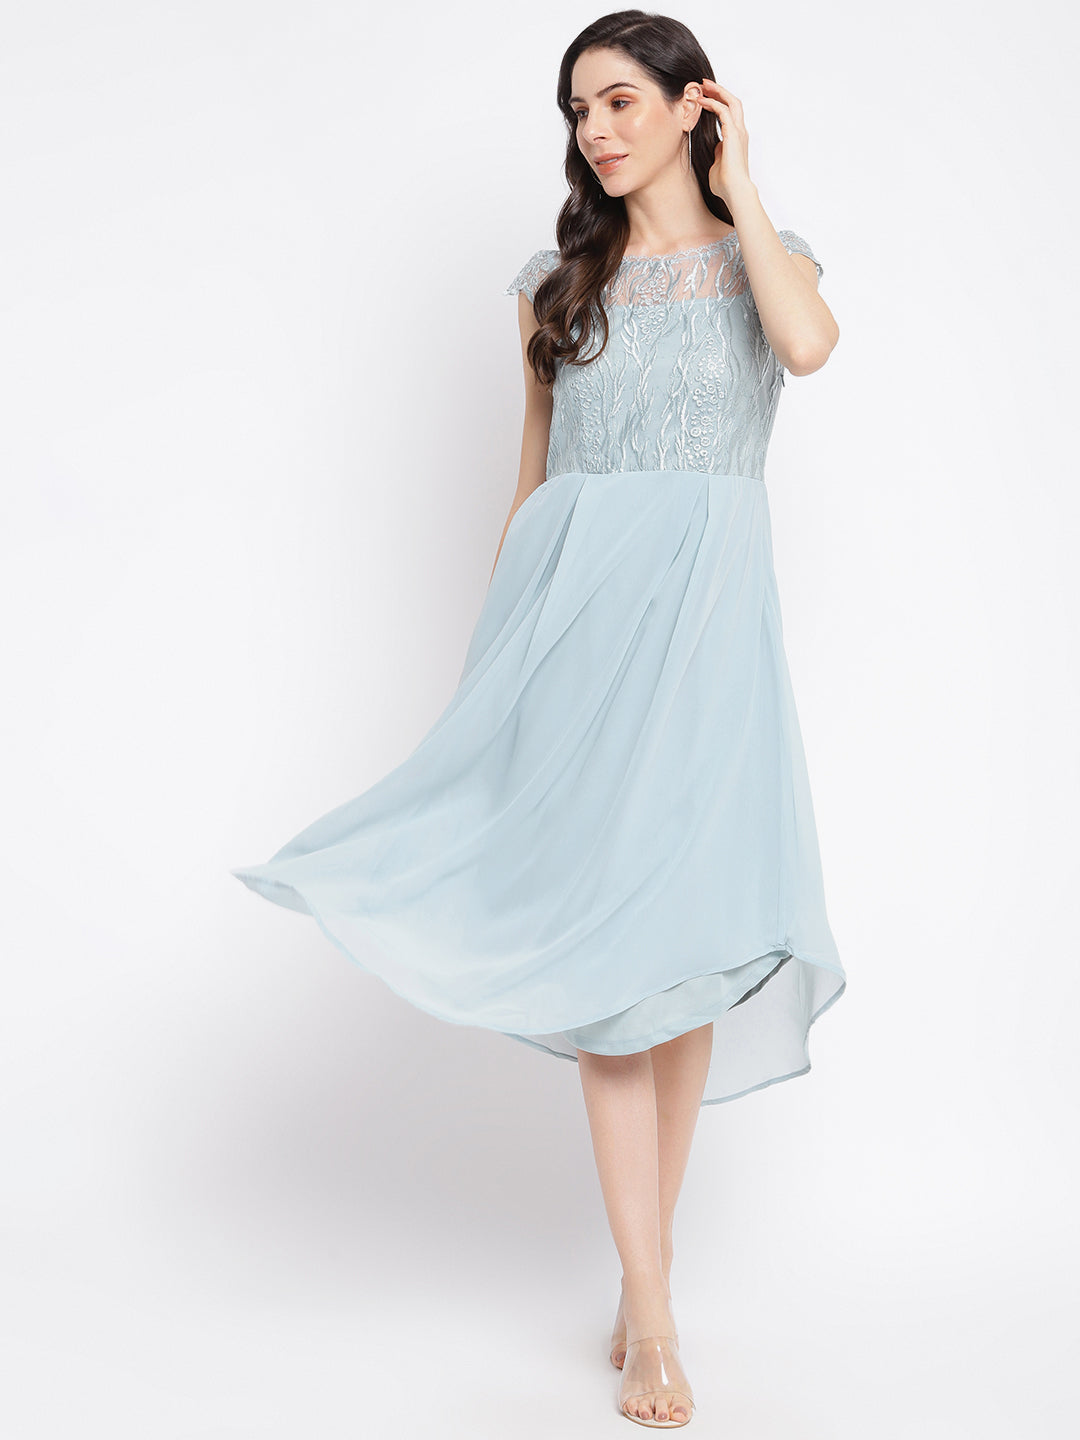 Blue Cap Sleeve Maxi With Solid Dress